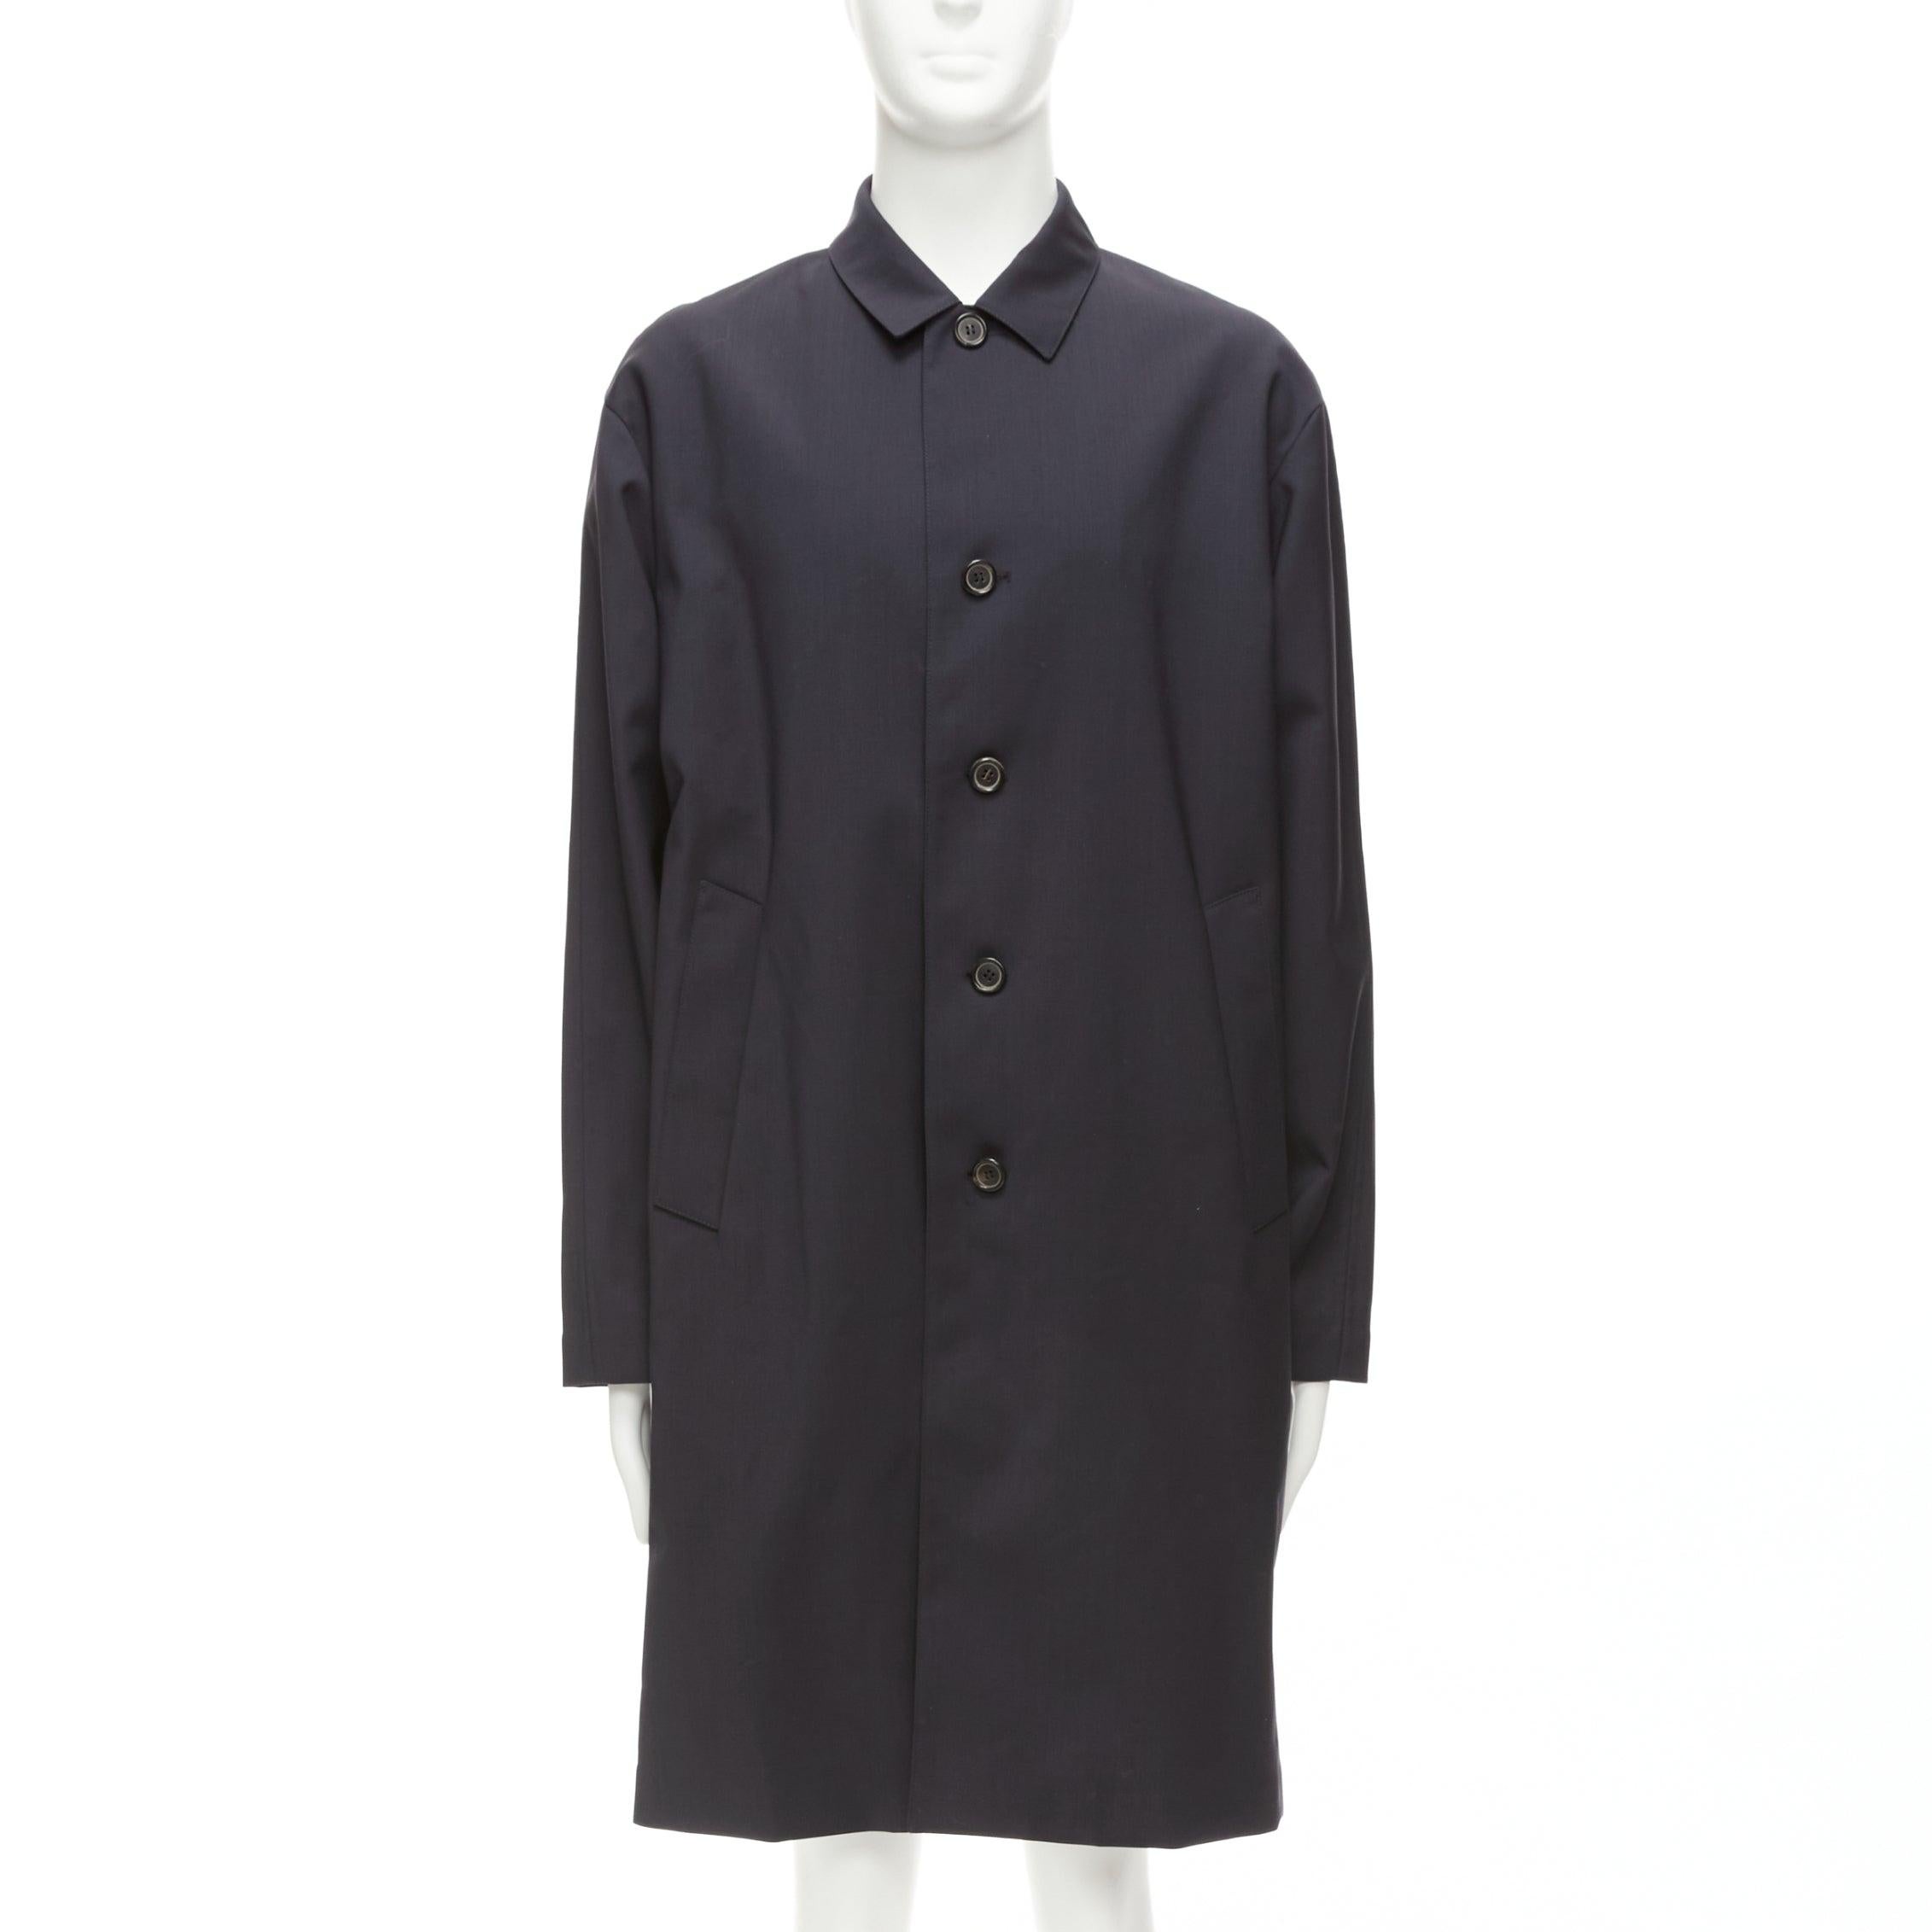 SOLID HOMME black 100% wool taped lining longline minimal rain coat IT48 M
Reference: KYCG/A00051
Brand: Solid Homme
Material: Wool
Color: Black
Pattern: Solid
Closure: Button
Lining: White
Extra Details: Taped lining.
Made in: